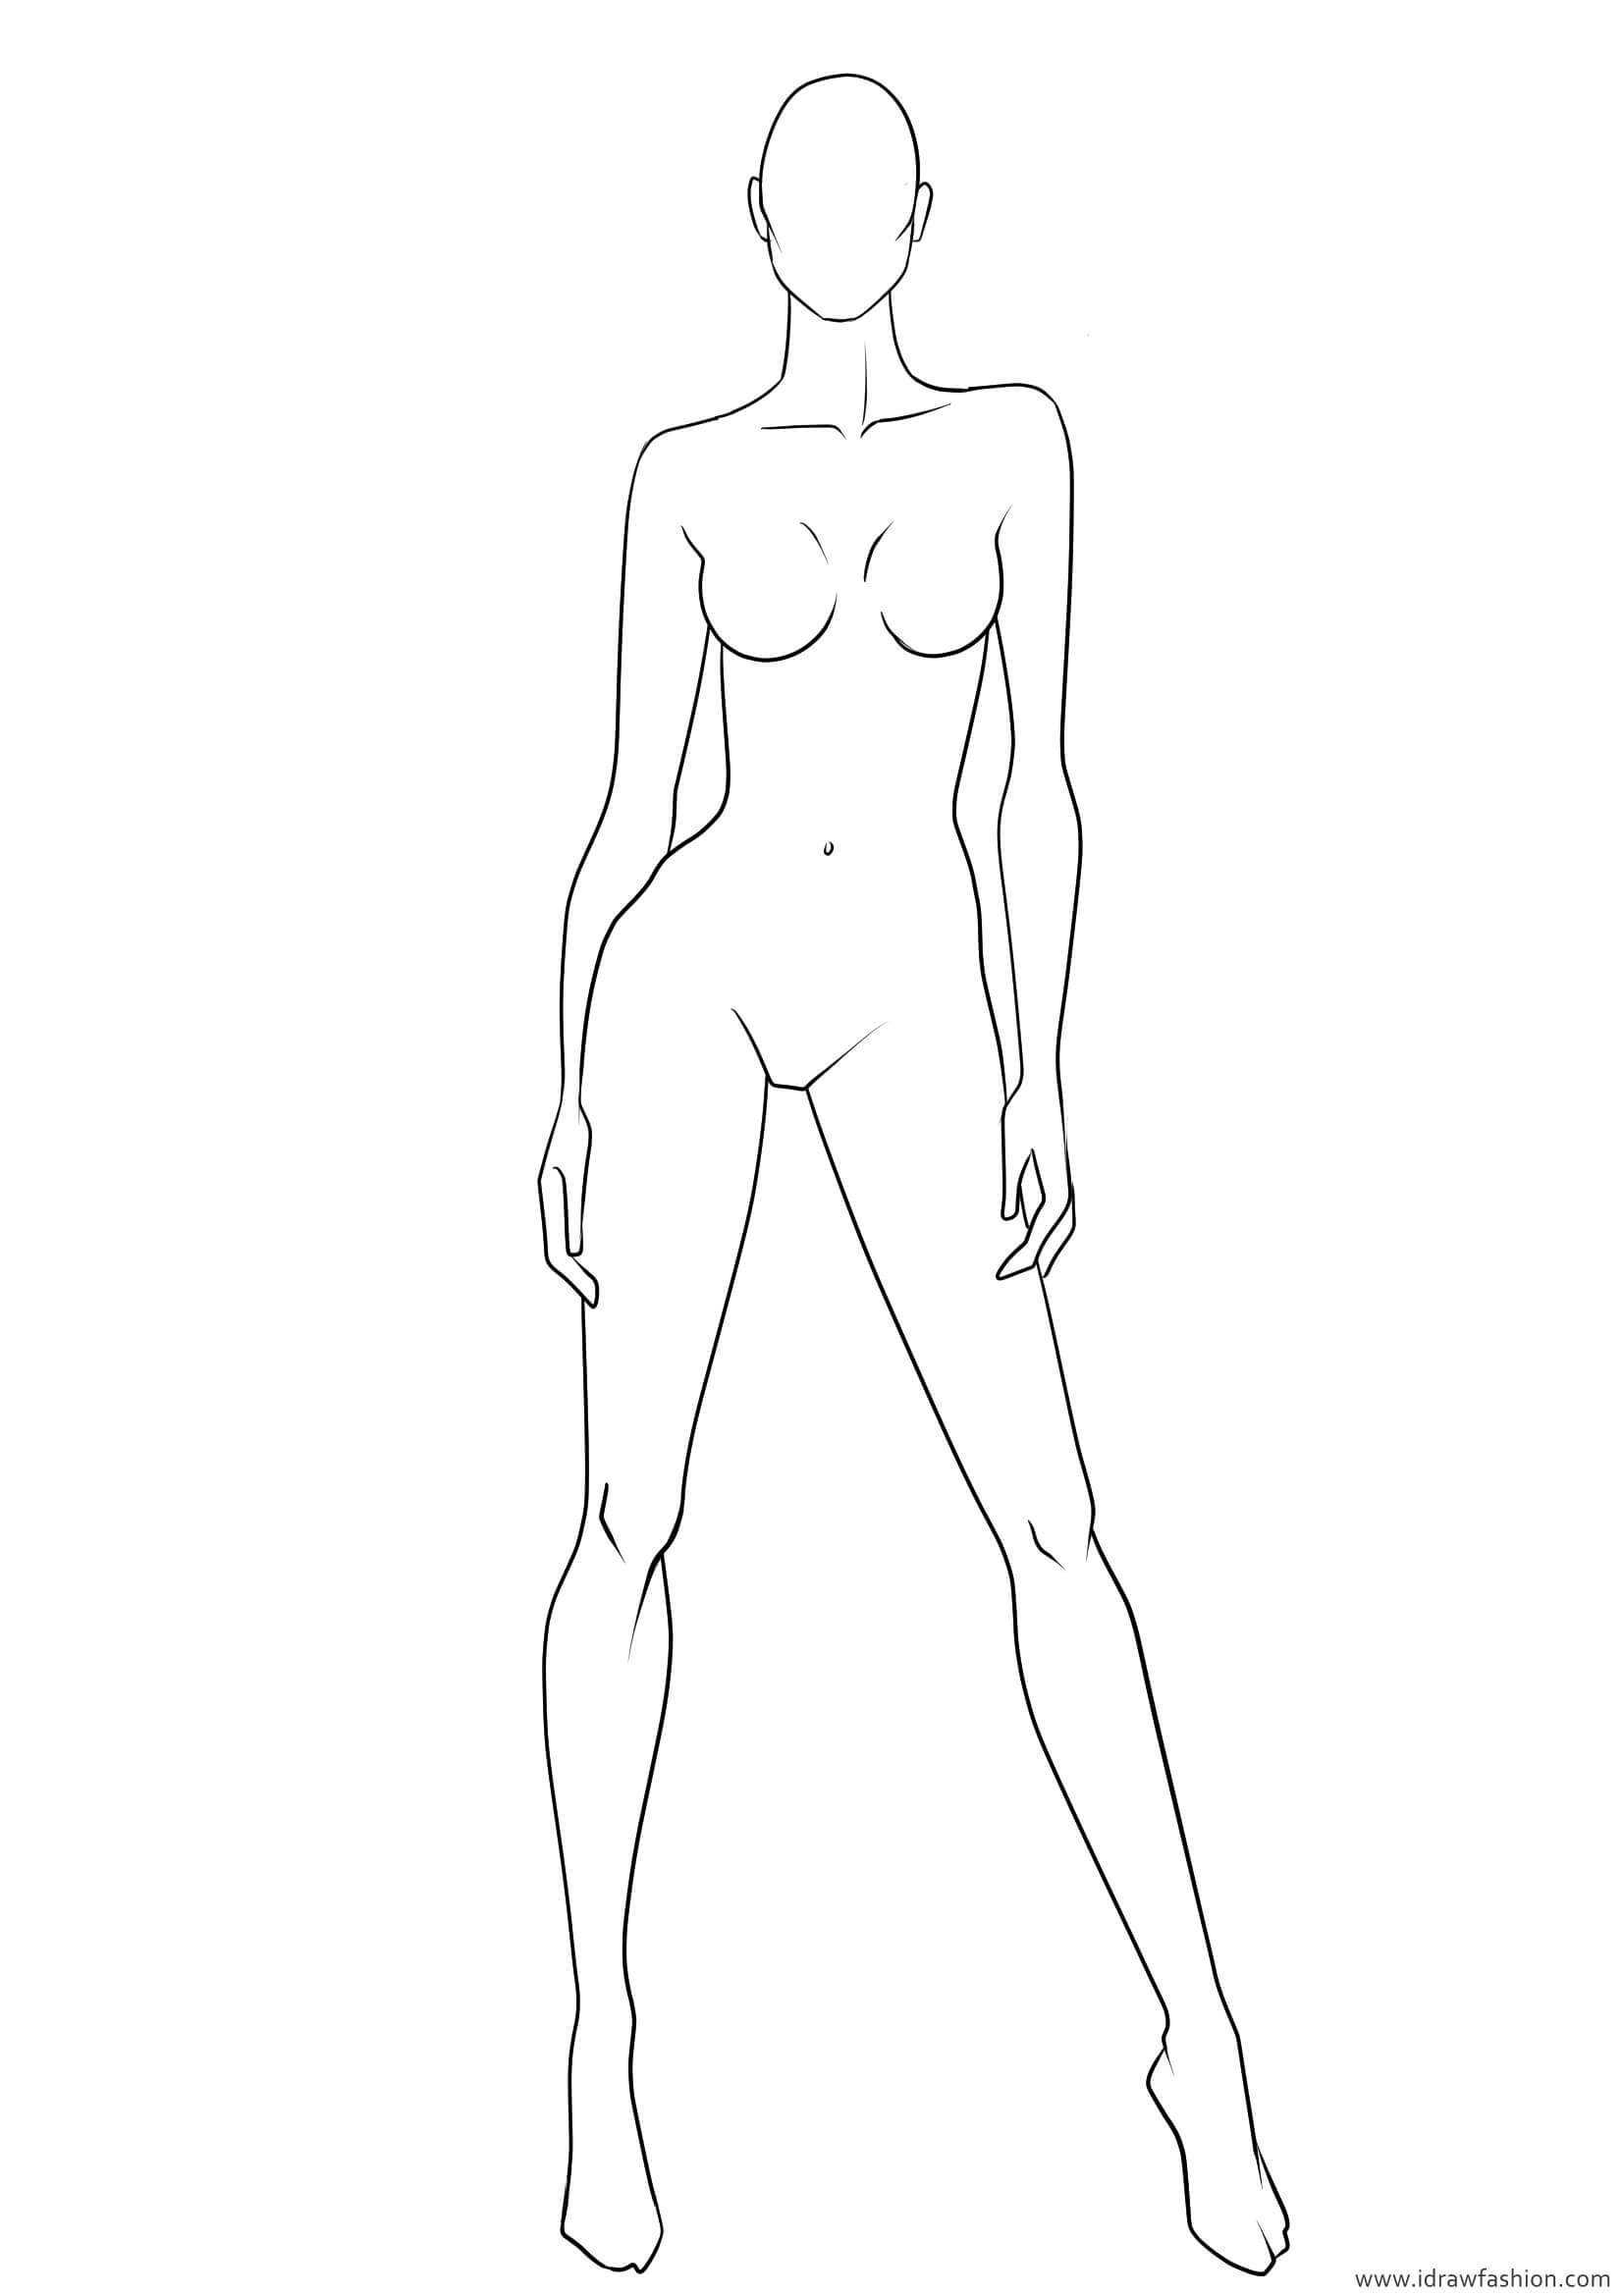 Blank Body Sketch At Paintingvalley | Explore Collection Pertaining To Blank Model Sketch Template